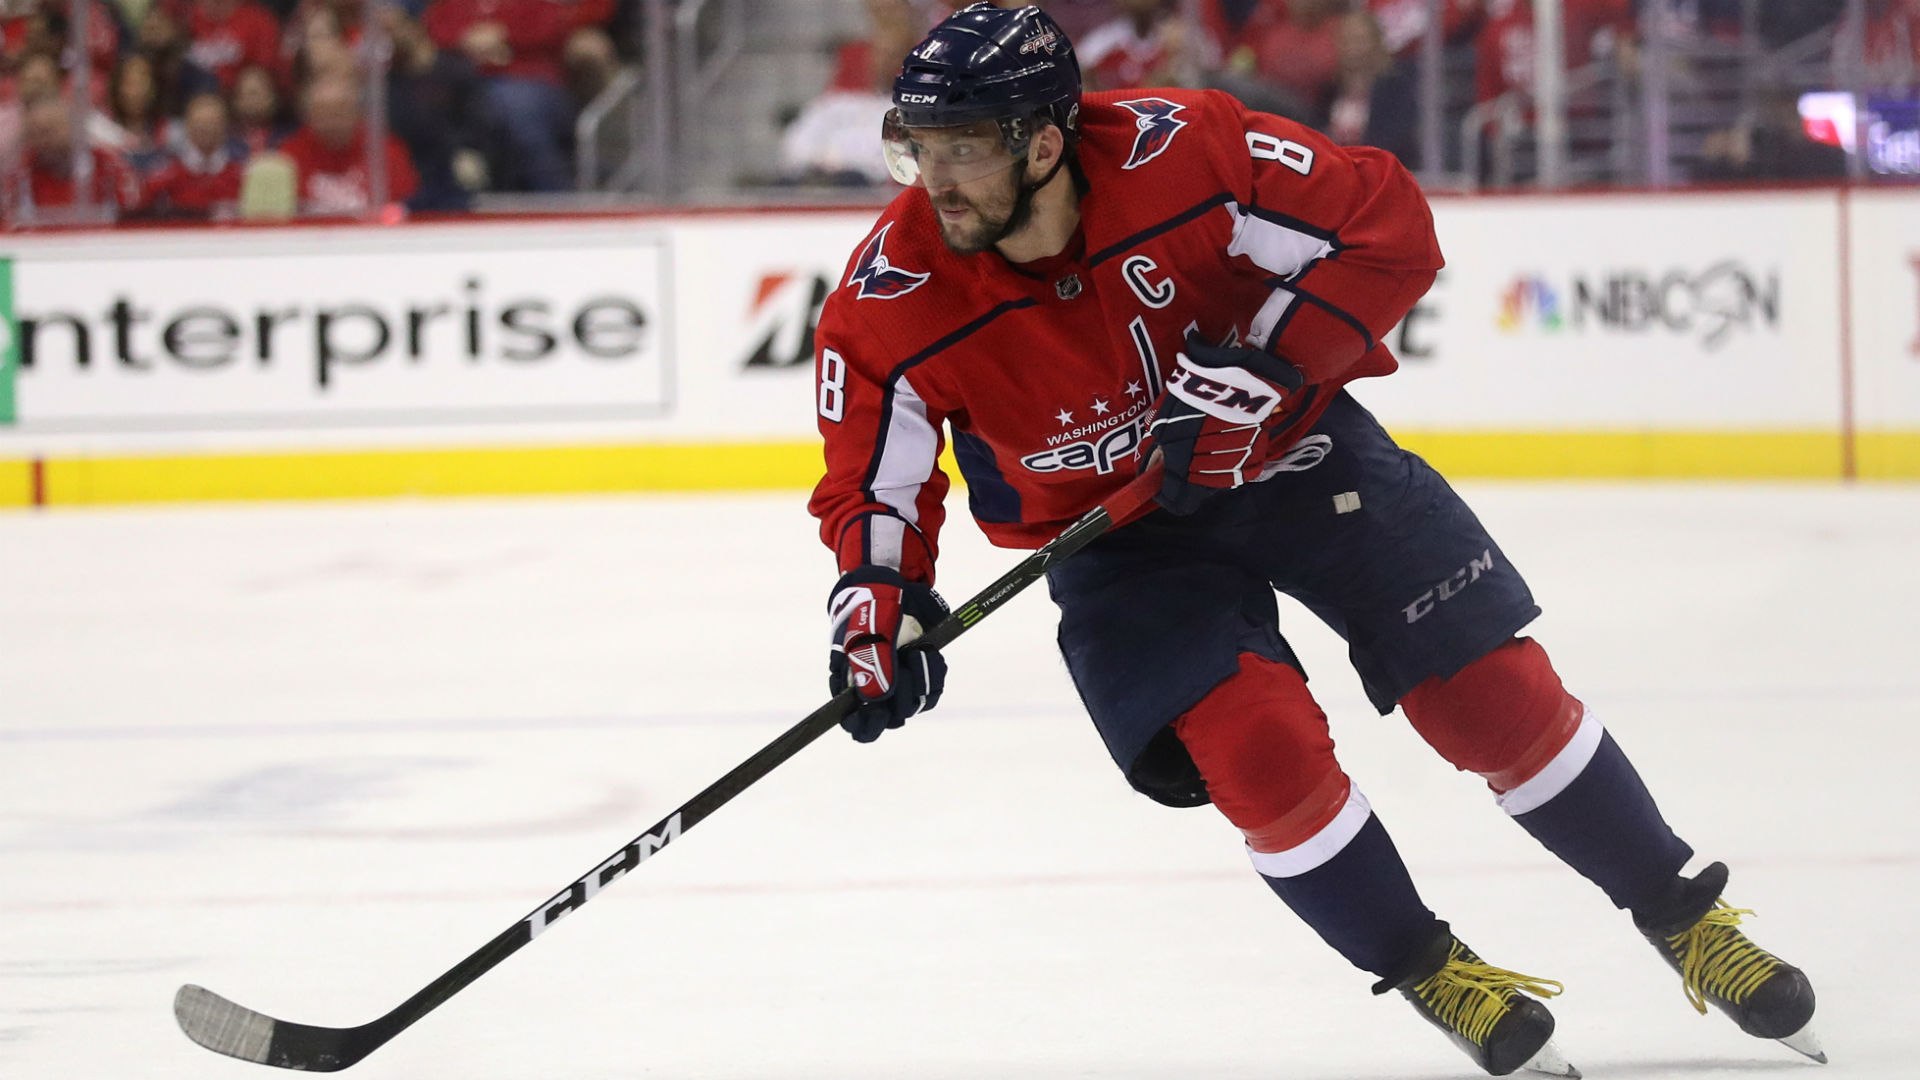 NHL playoffs 2018: Capitals' Ovechkin 'can't wait' for second-round series vs. Crosby, Penguins